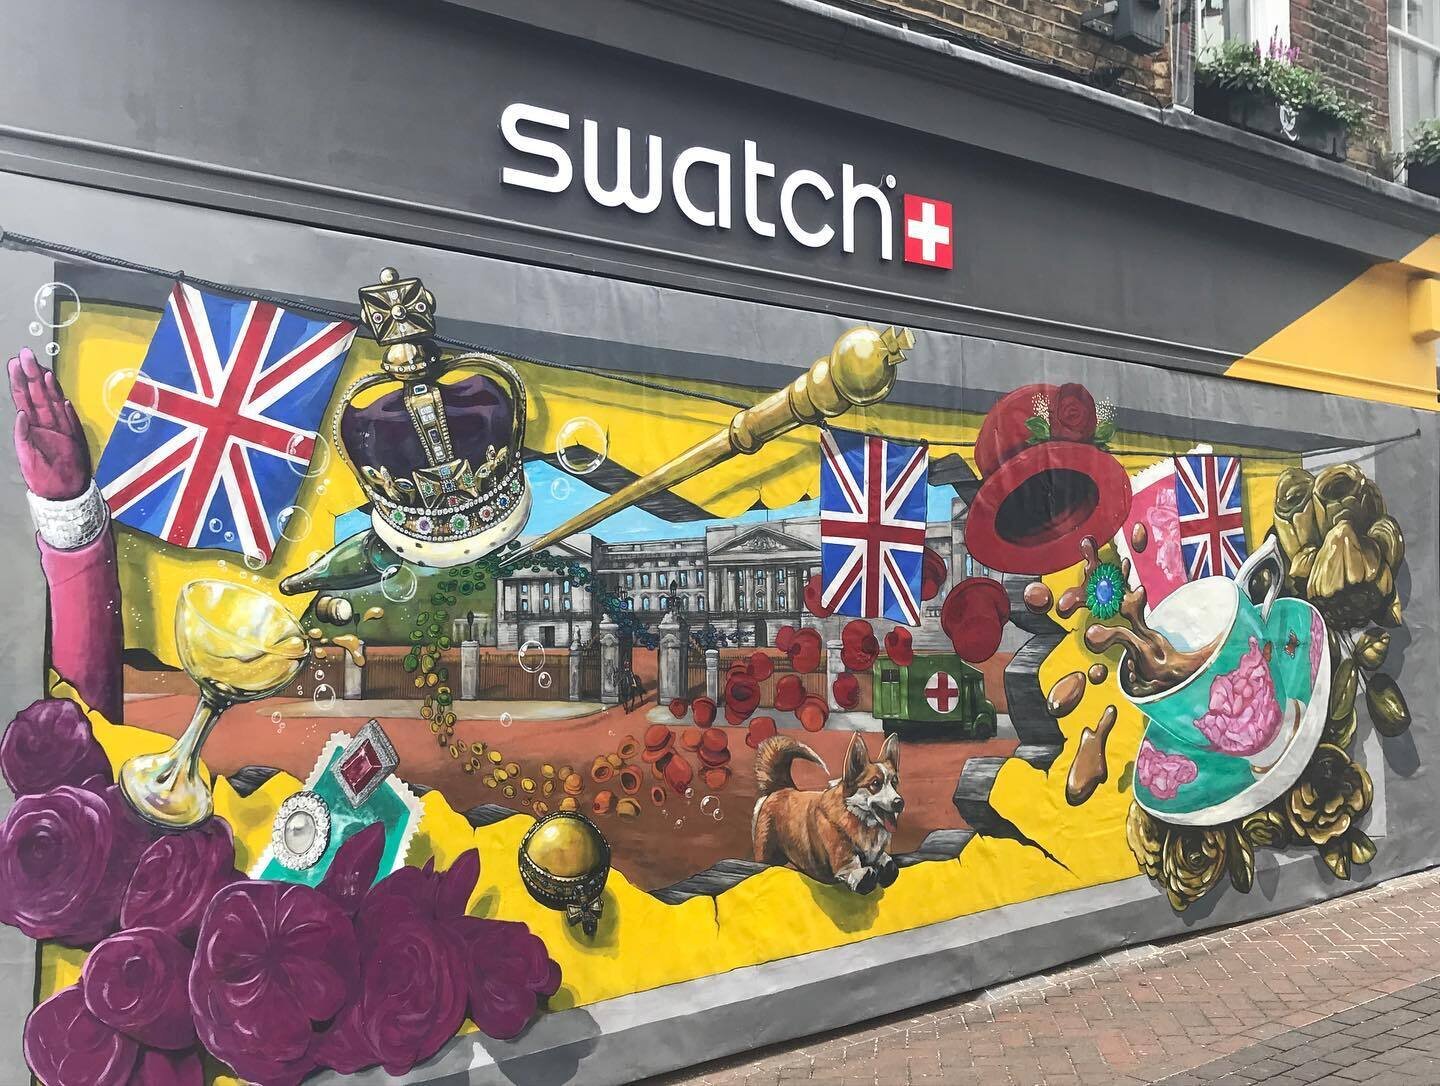 Swatch CEO: Apple Watch is 'interesting toy' that can't last more